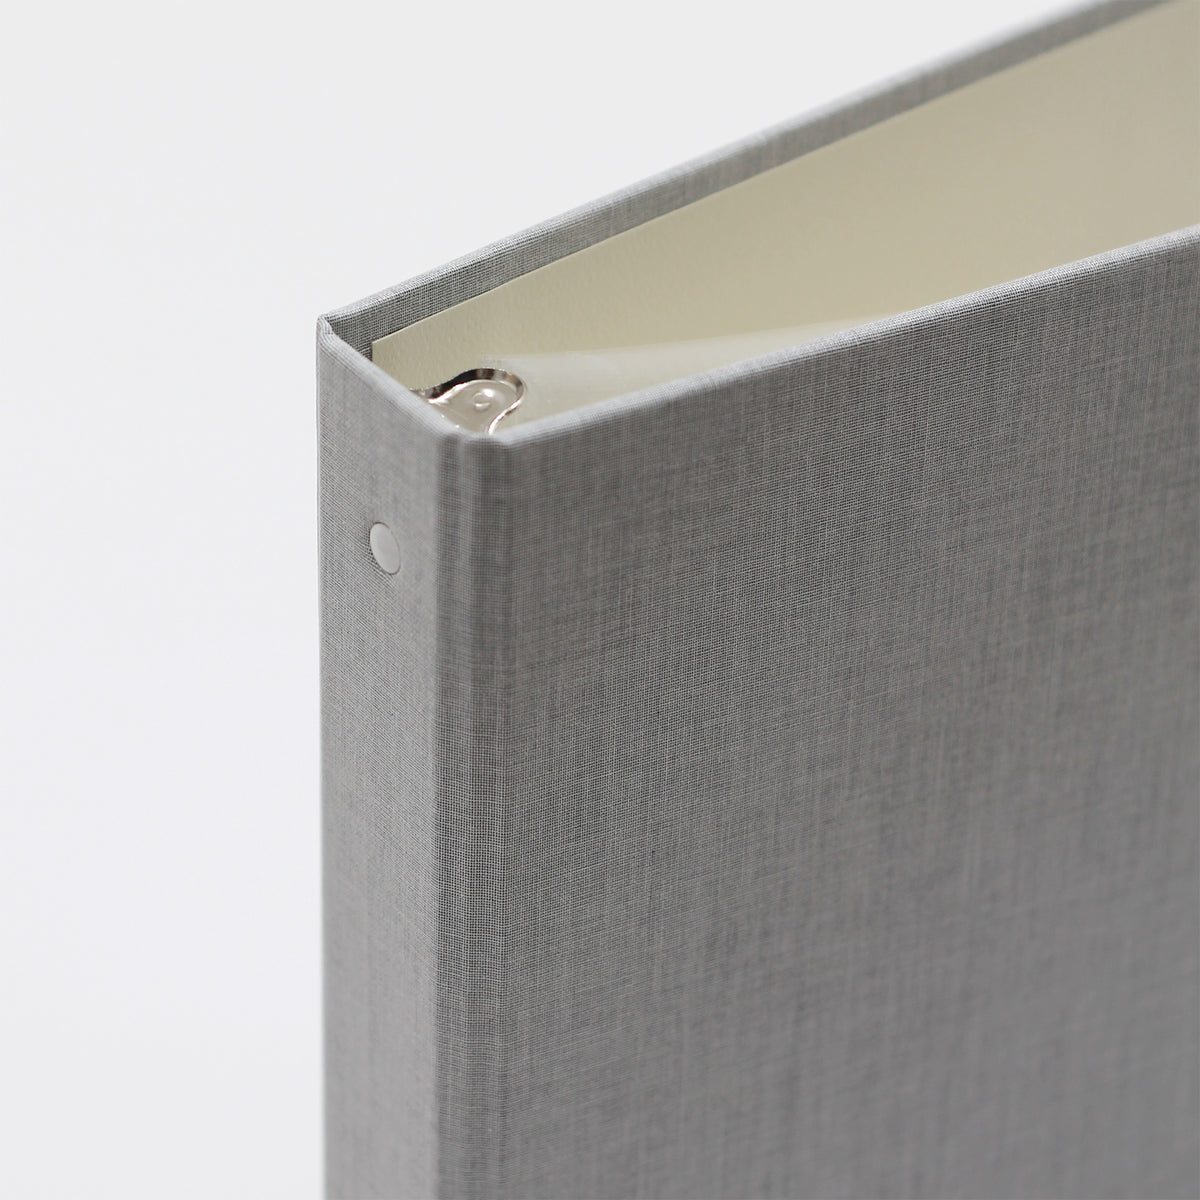 Medium Photo Binder For 4x6 Photos | Cover: Dove Gray Linen | Available Personalized